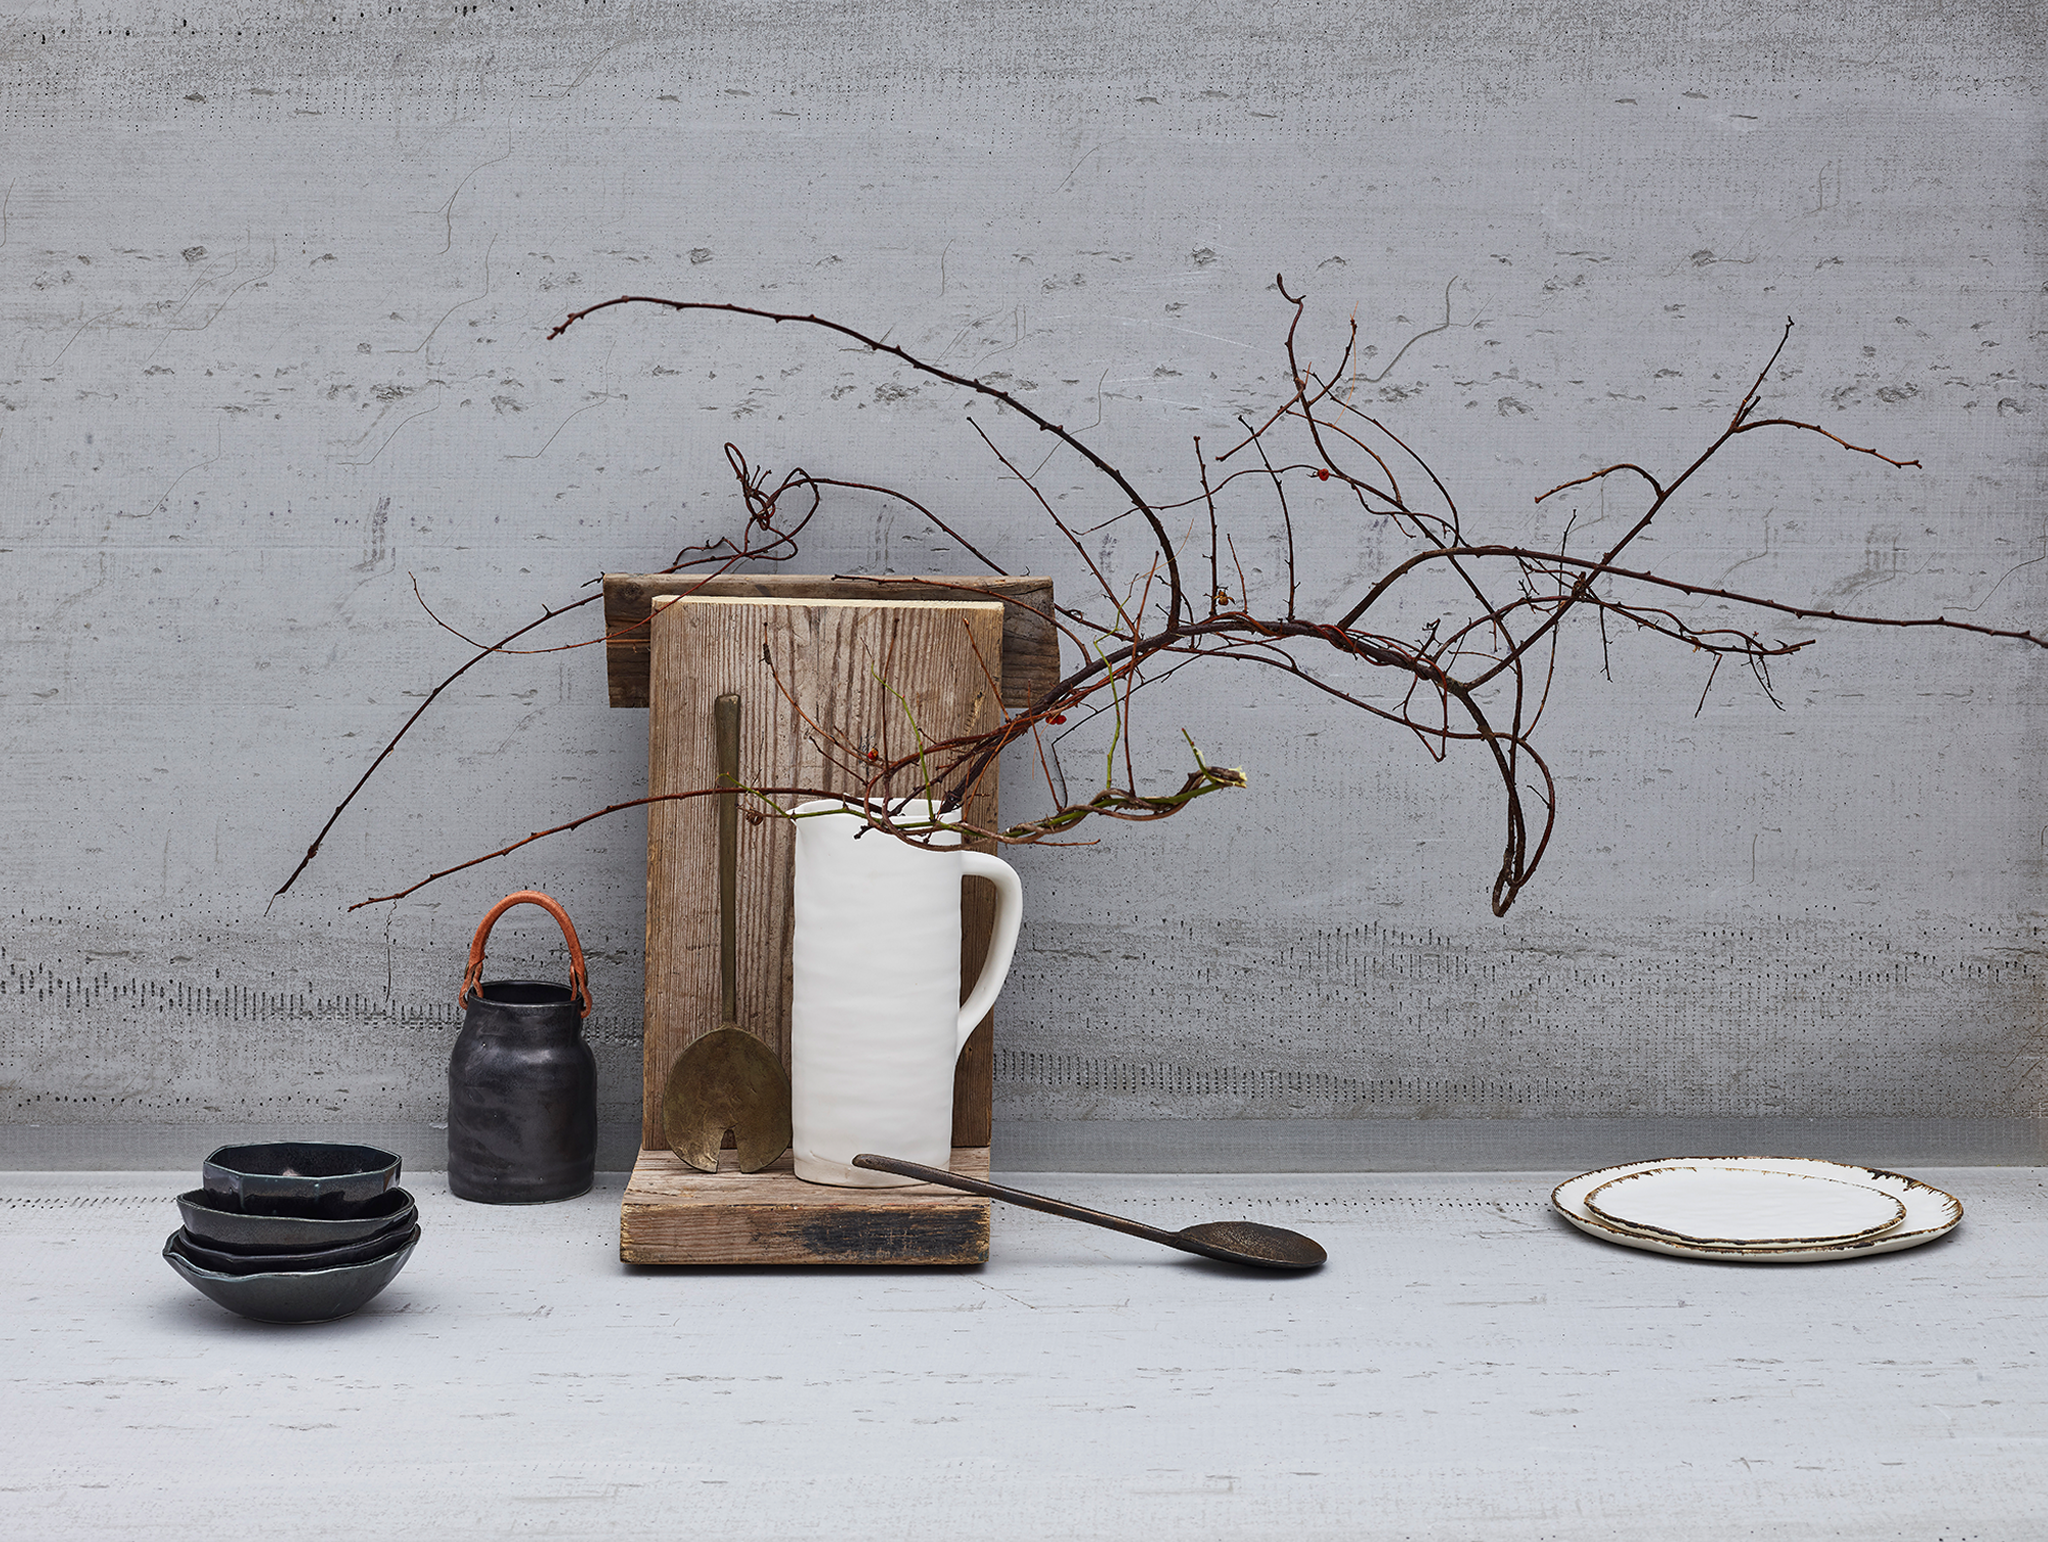 White ceramic pitcher with black ceramic bowls and bronze cast serving set on concrete background